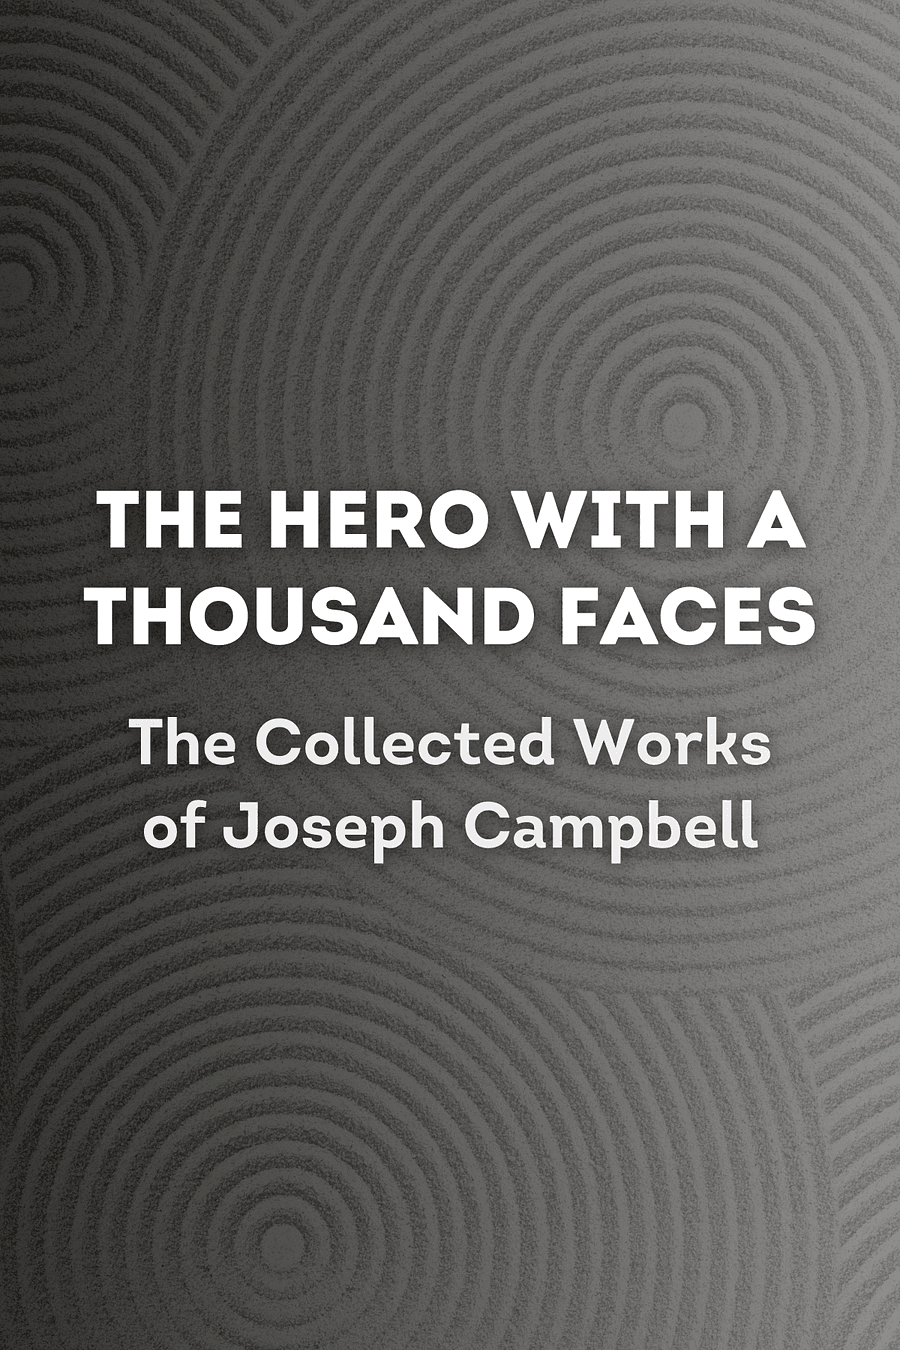 The Hero with a Thousand Faces (The Collected Works of Joseph Campbell) by Joseph Campbell - Book Summary